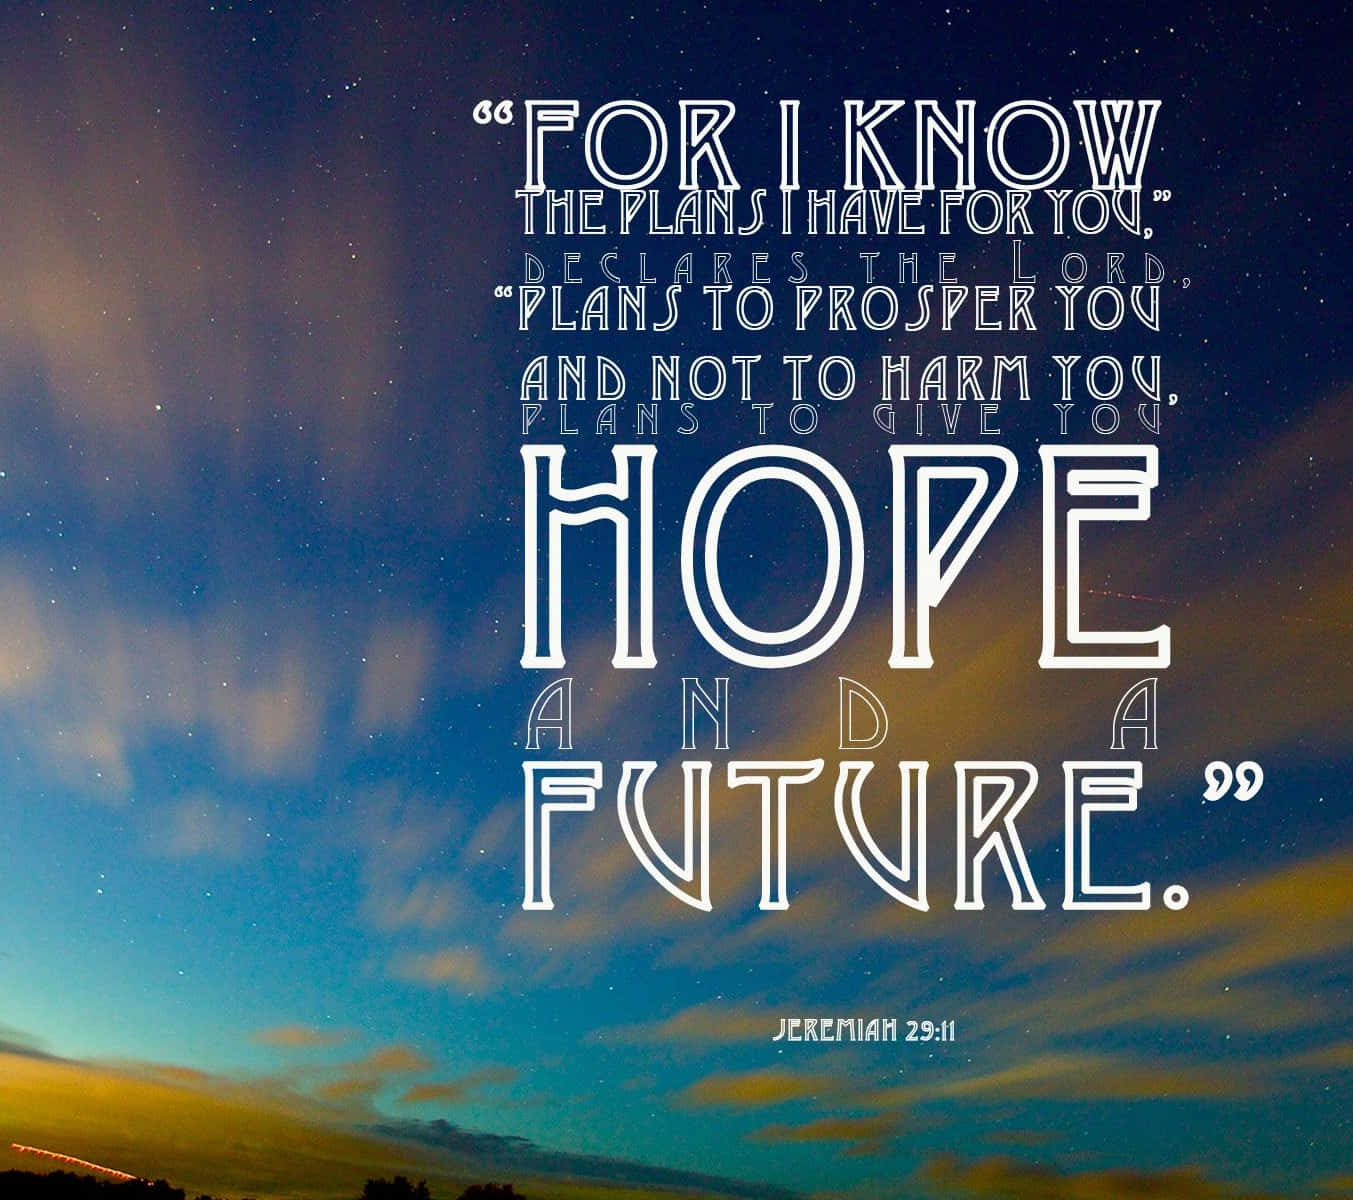 "'For I know the plans I have for you," declares the Lord, "Plans to prosper you and not to harm you, plans to give you hope and a future.`, Jeremiah 29:11 Wallpaper